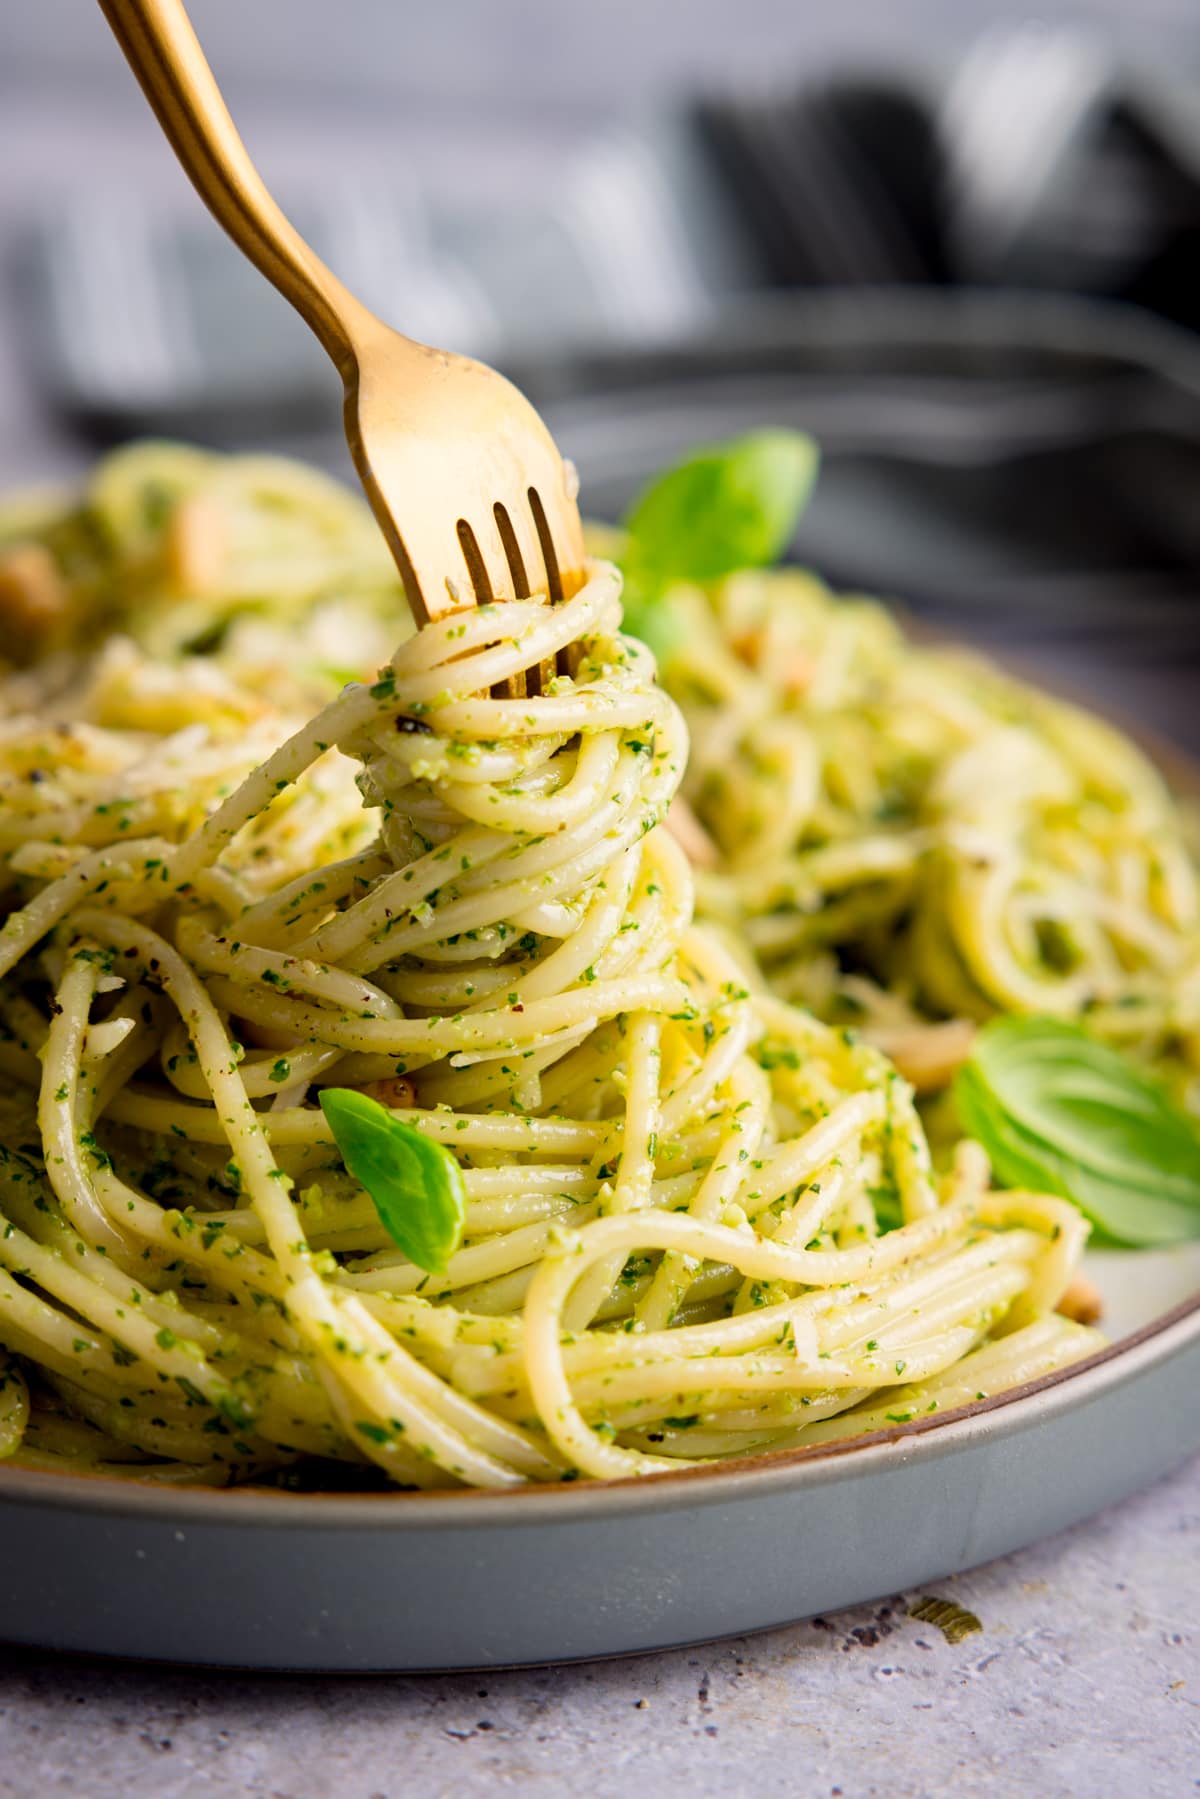 Pesto spaghetti on a light grey plate being swirled with a gold fork. The pasta is sprinkled with baby basil leaves, toasted pine nuts and parmesan. The plate is on a light grey surface.